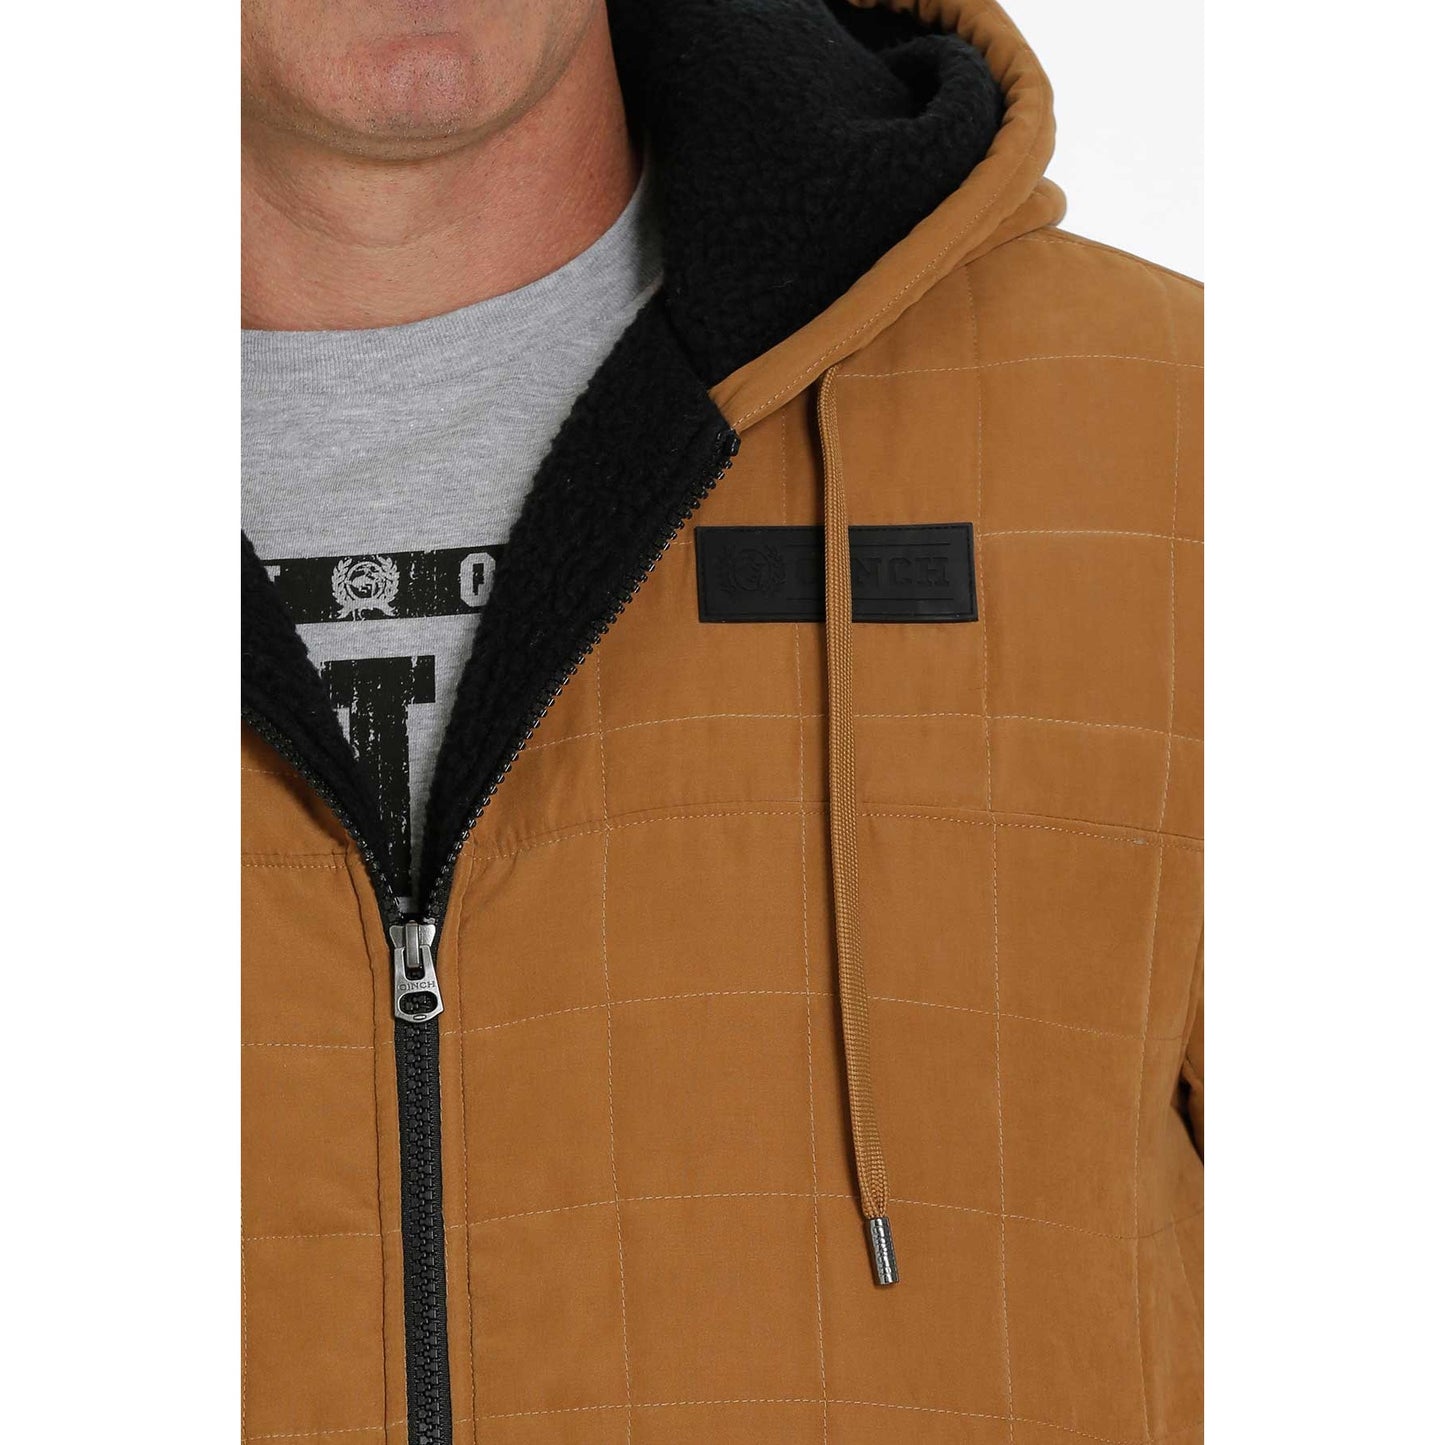 Cinch Men's Sherpa Lined Brown Canvas  Hooded Jacket MWJ1554001